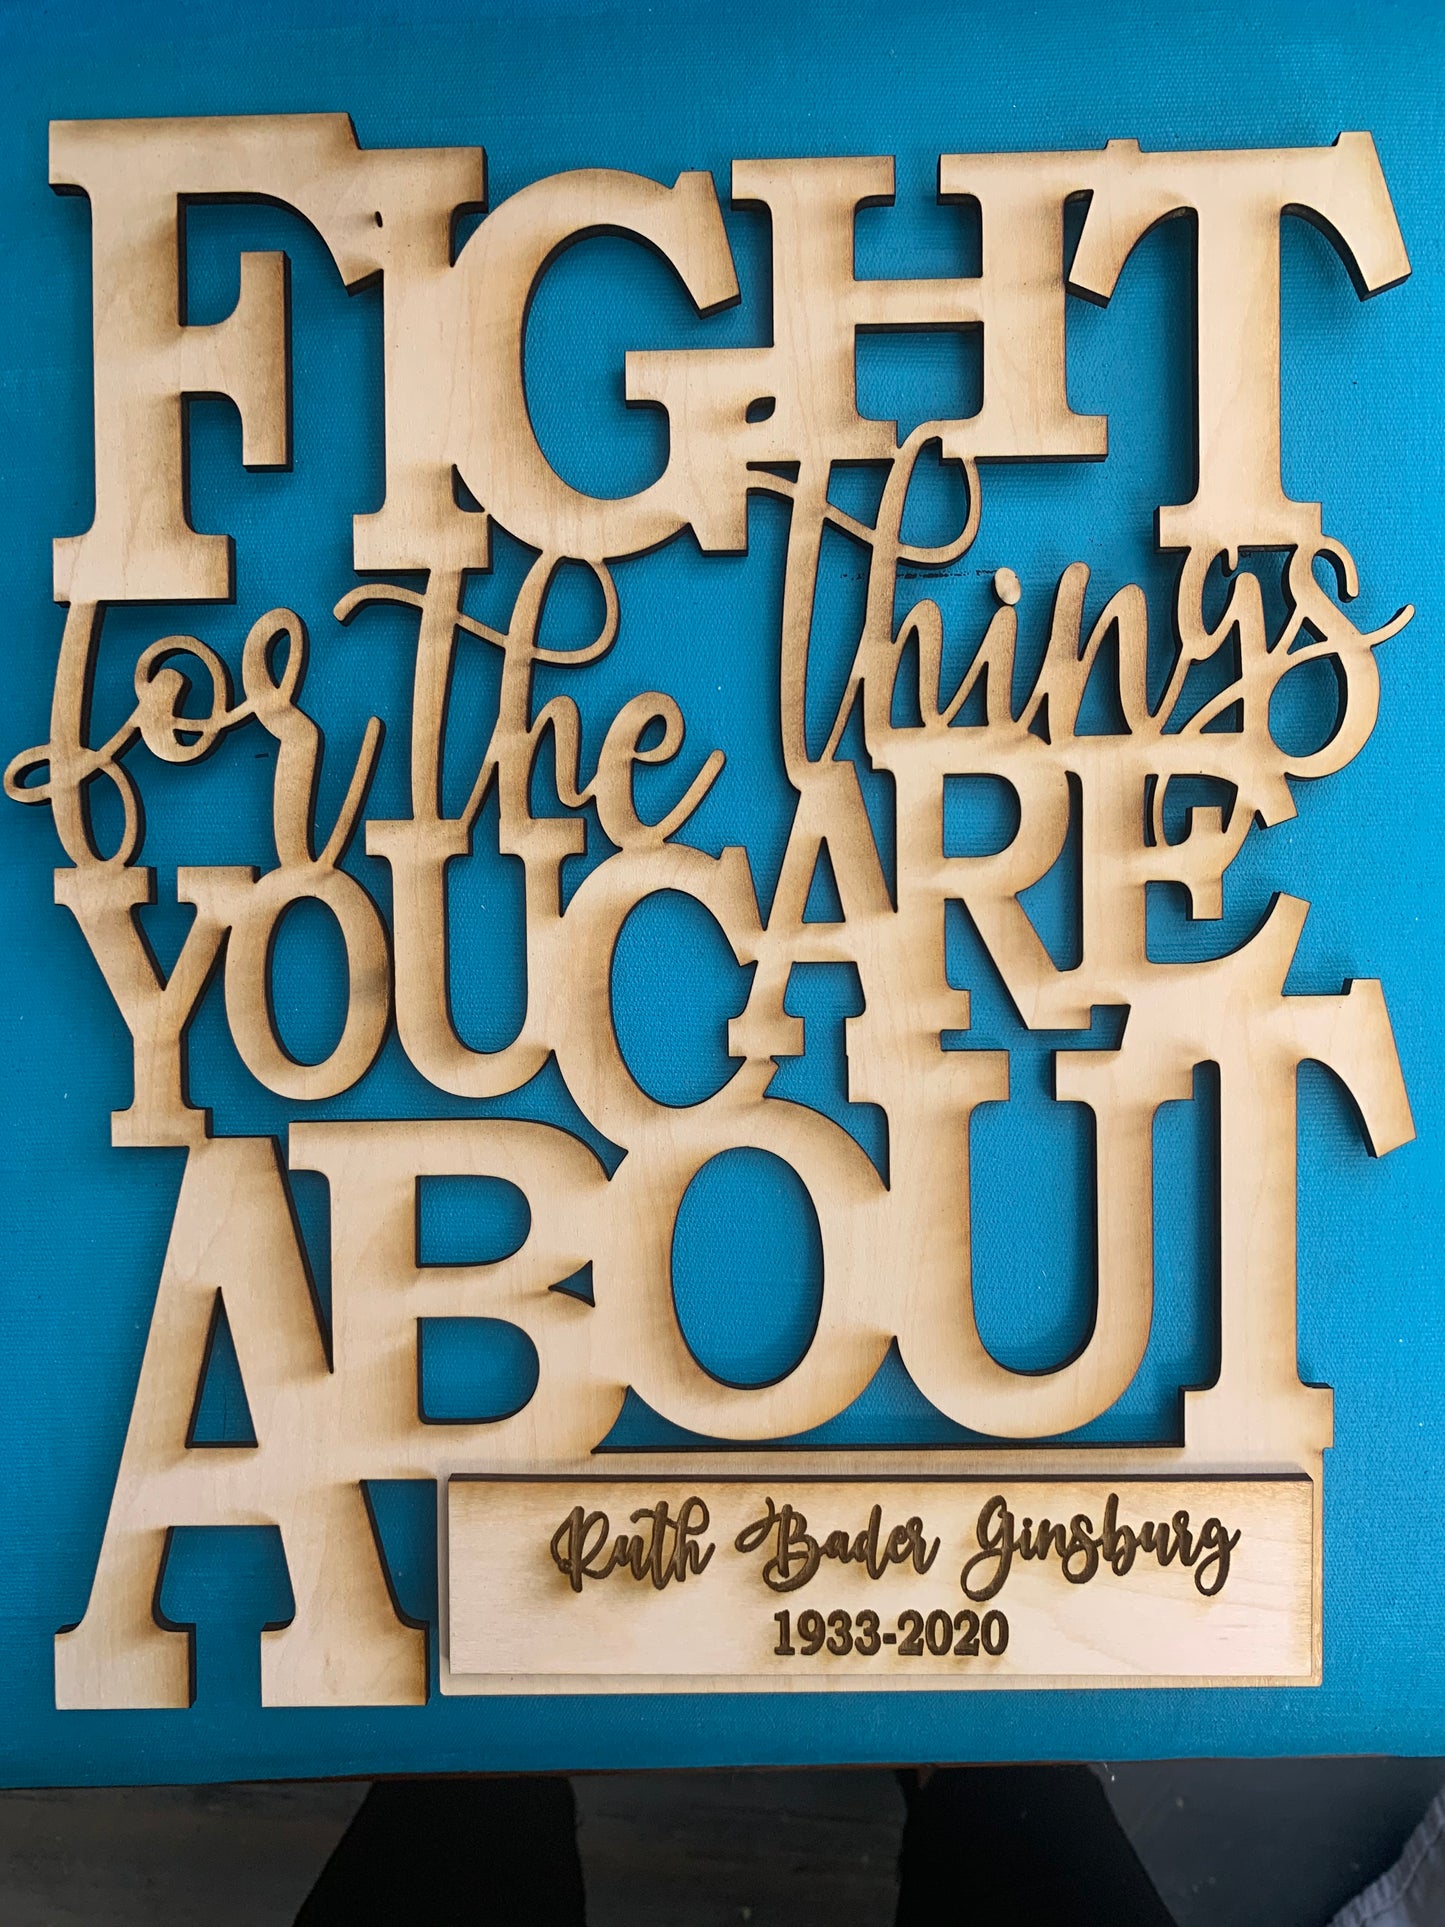 RBG Tribute Quote: Fight for the Things You Care About